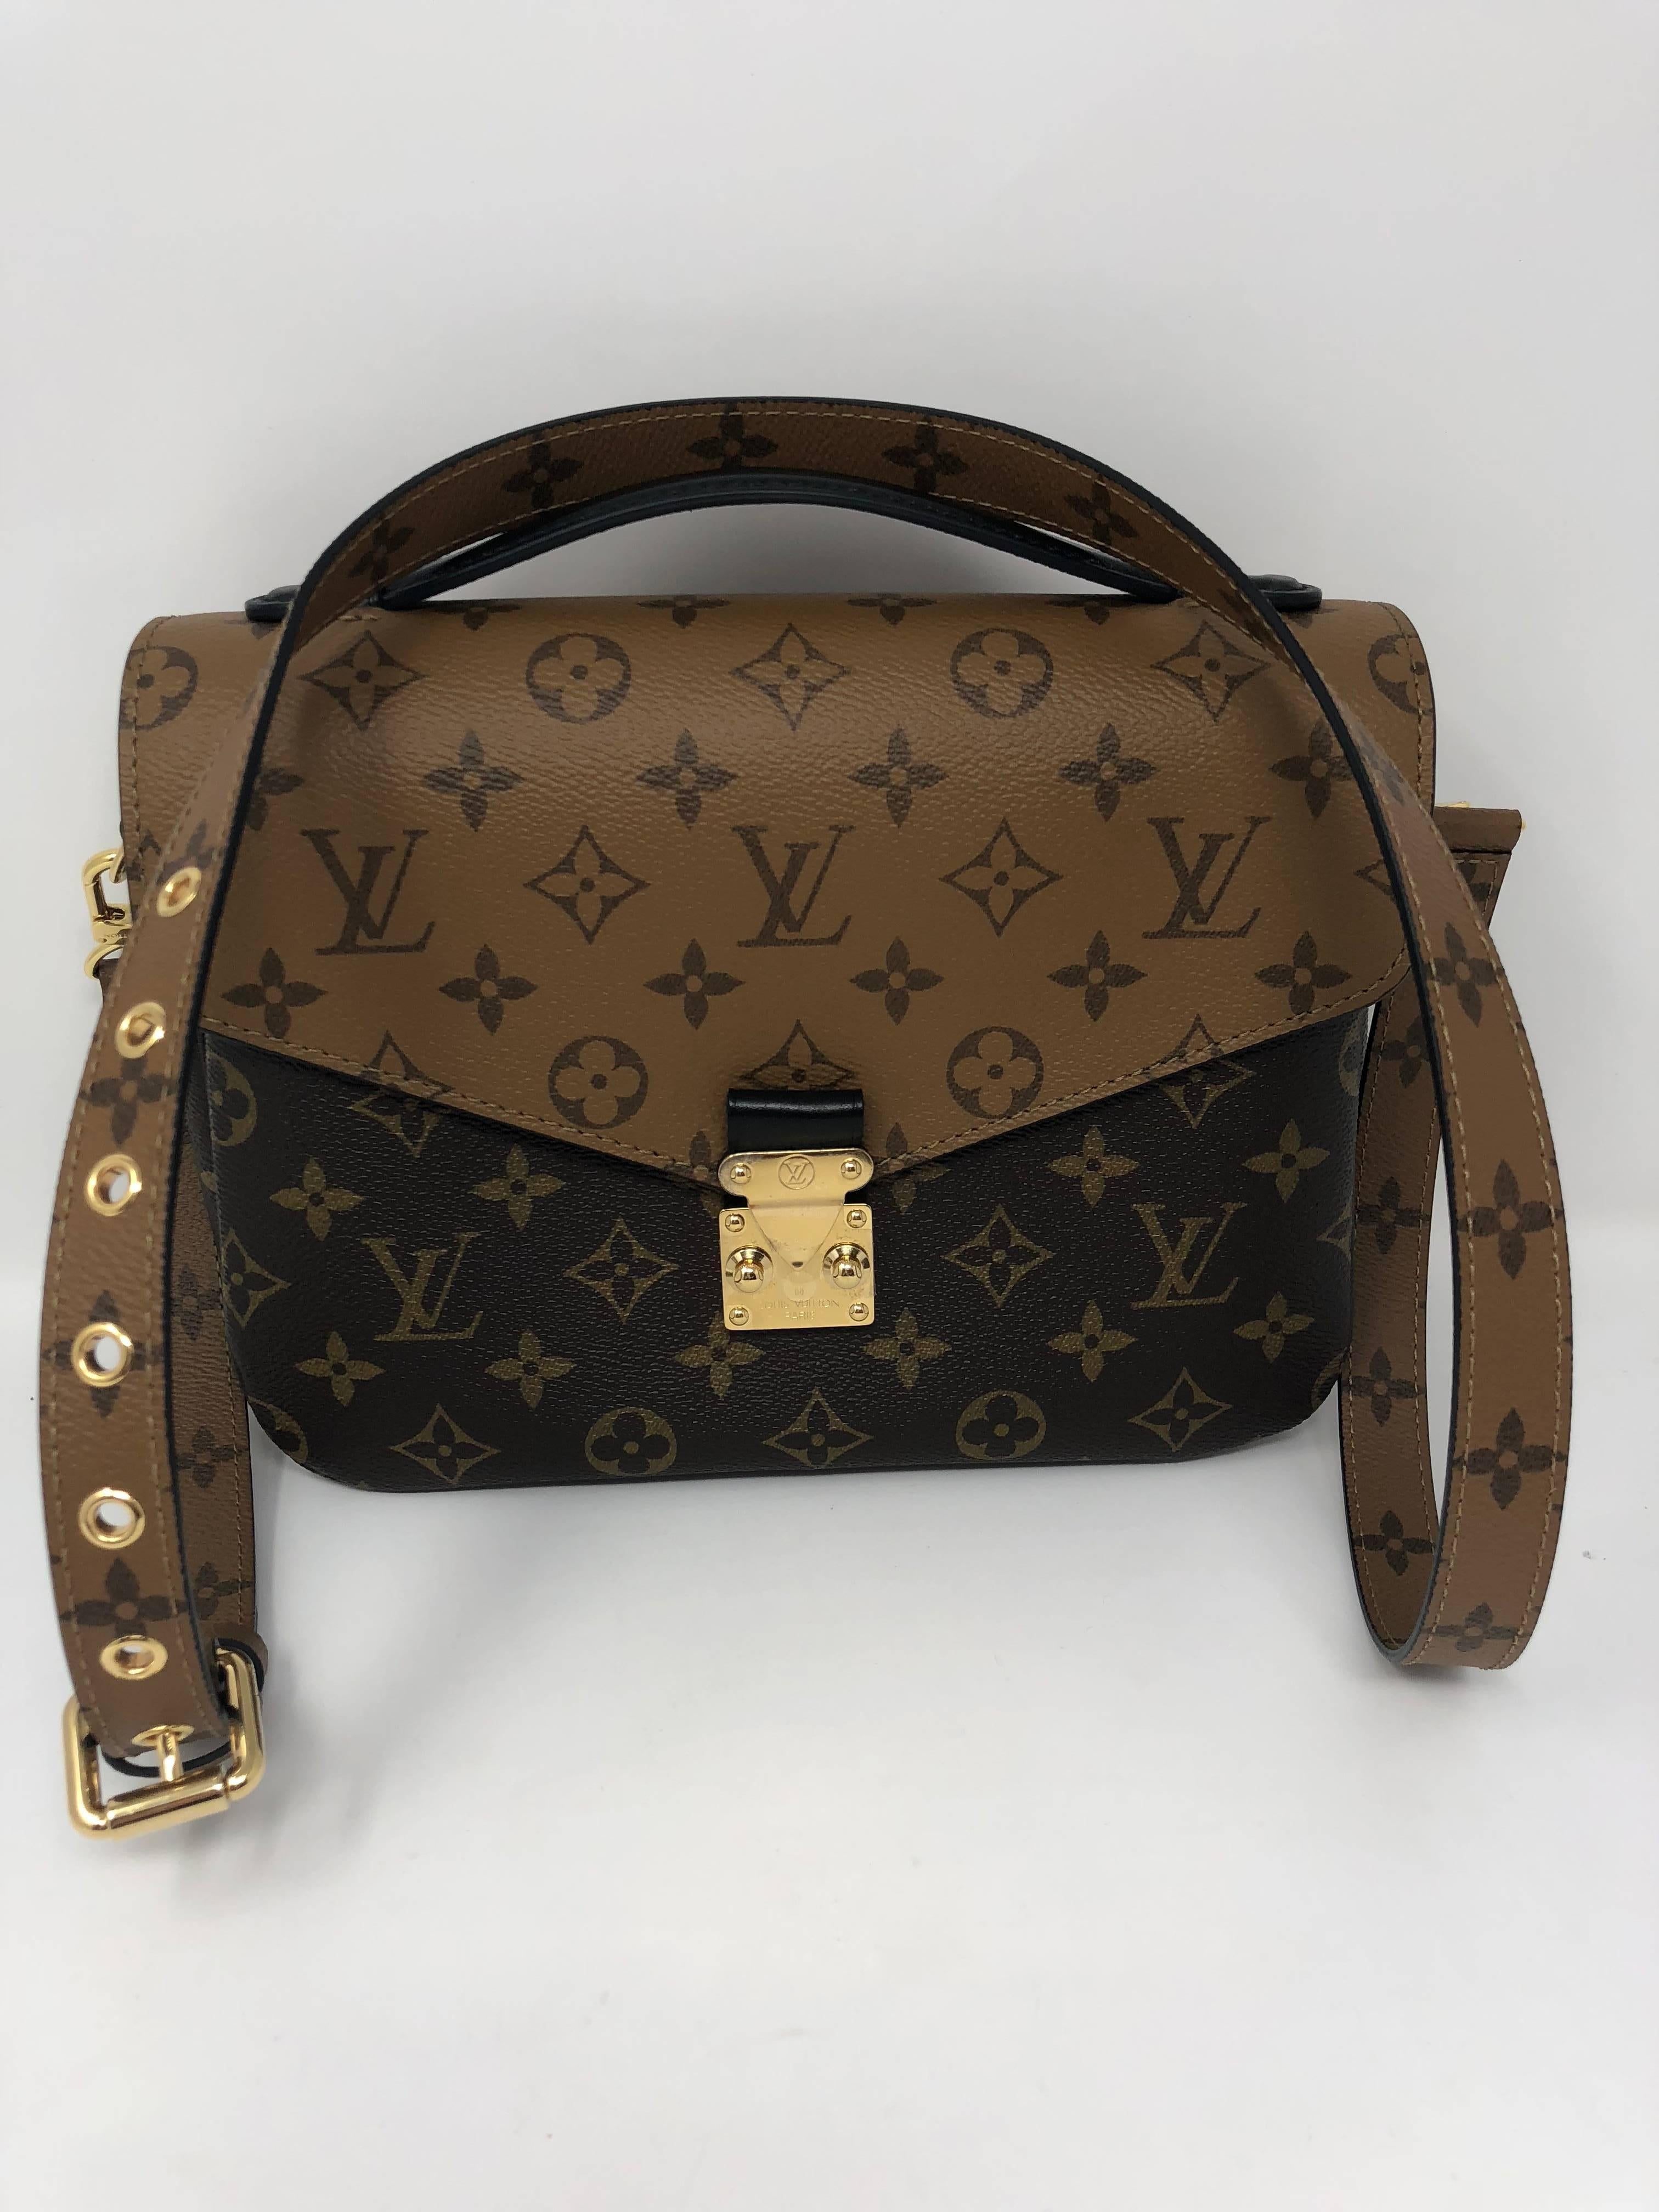 Authentic Louis Vuitton Metis Reverse crossbody bag. Limited edition and sold out. Brand New with plastic still on the hardware. Comes with complete set, original dust cover and box. Guaranteed authentic. 